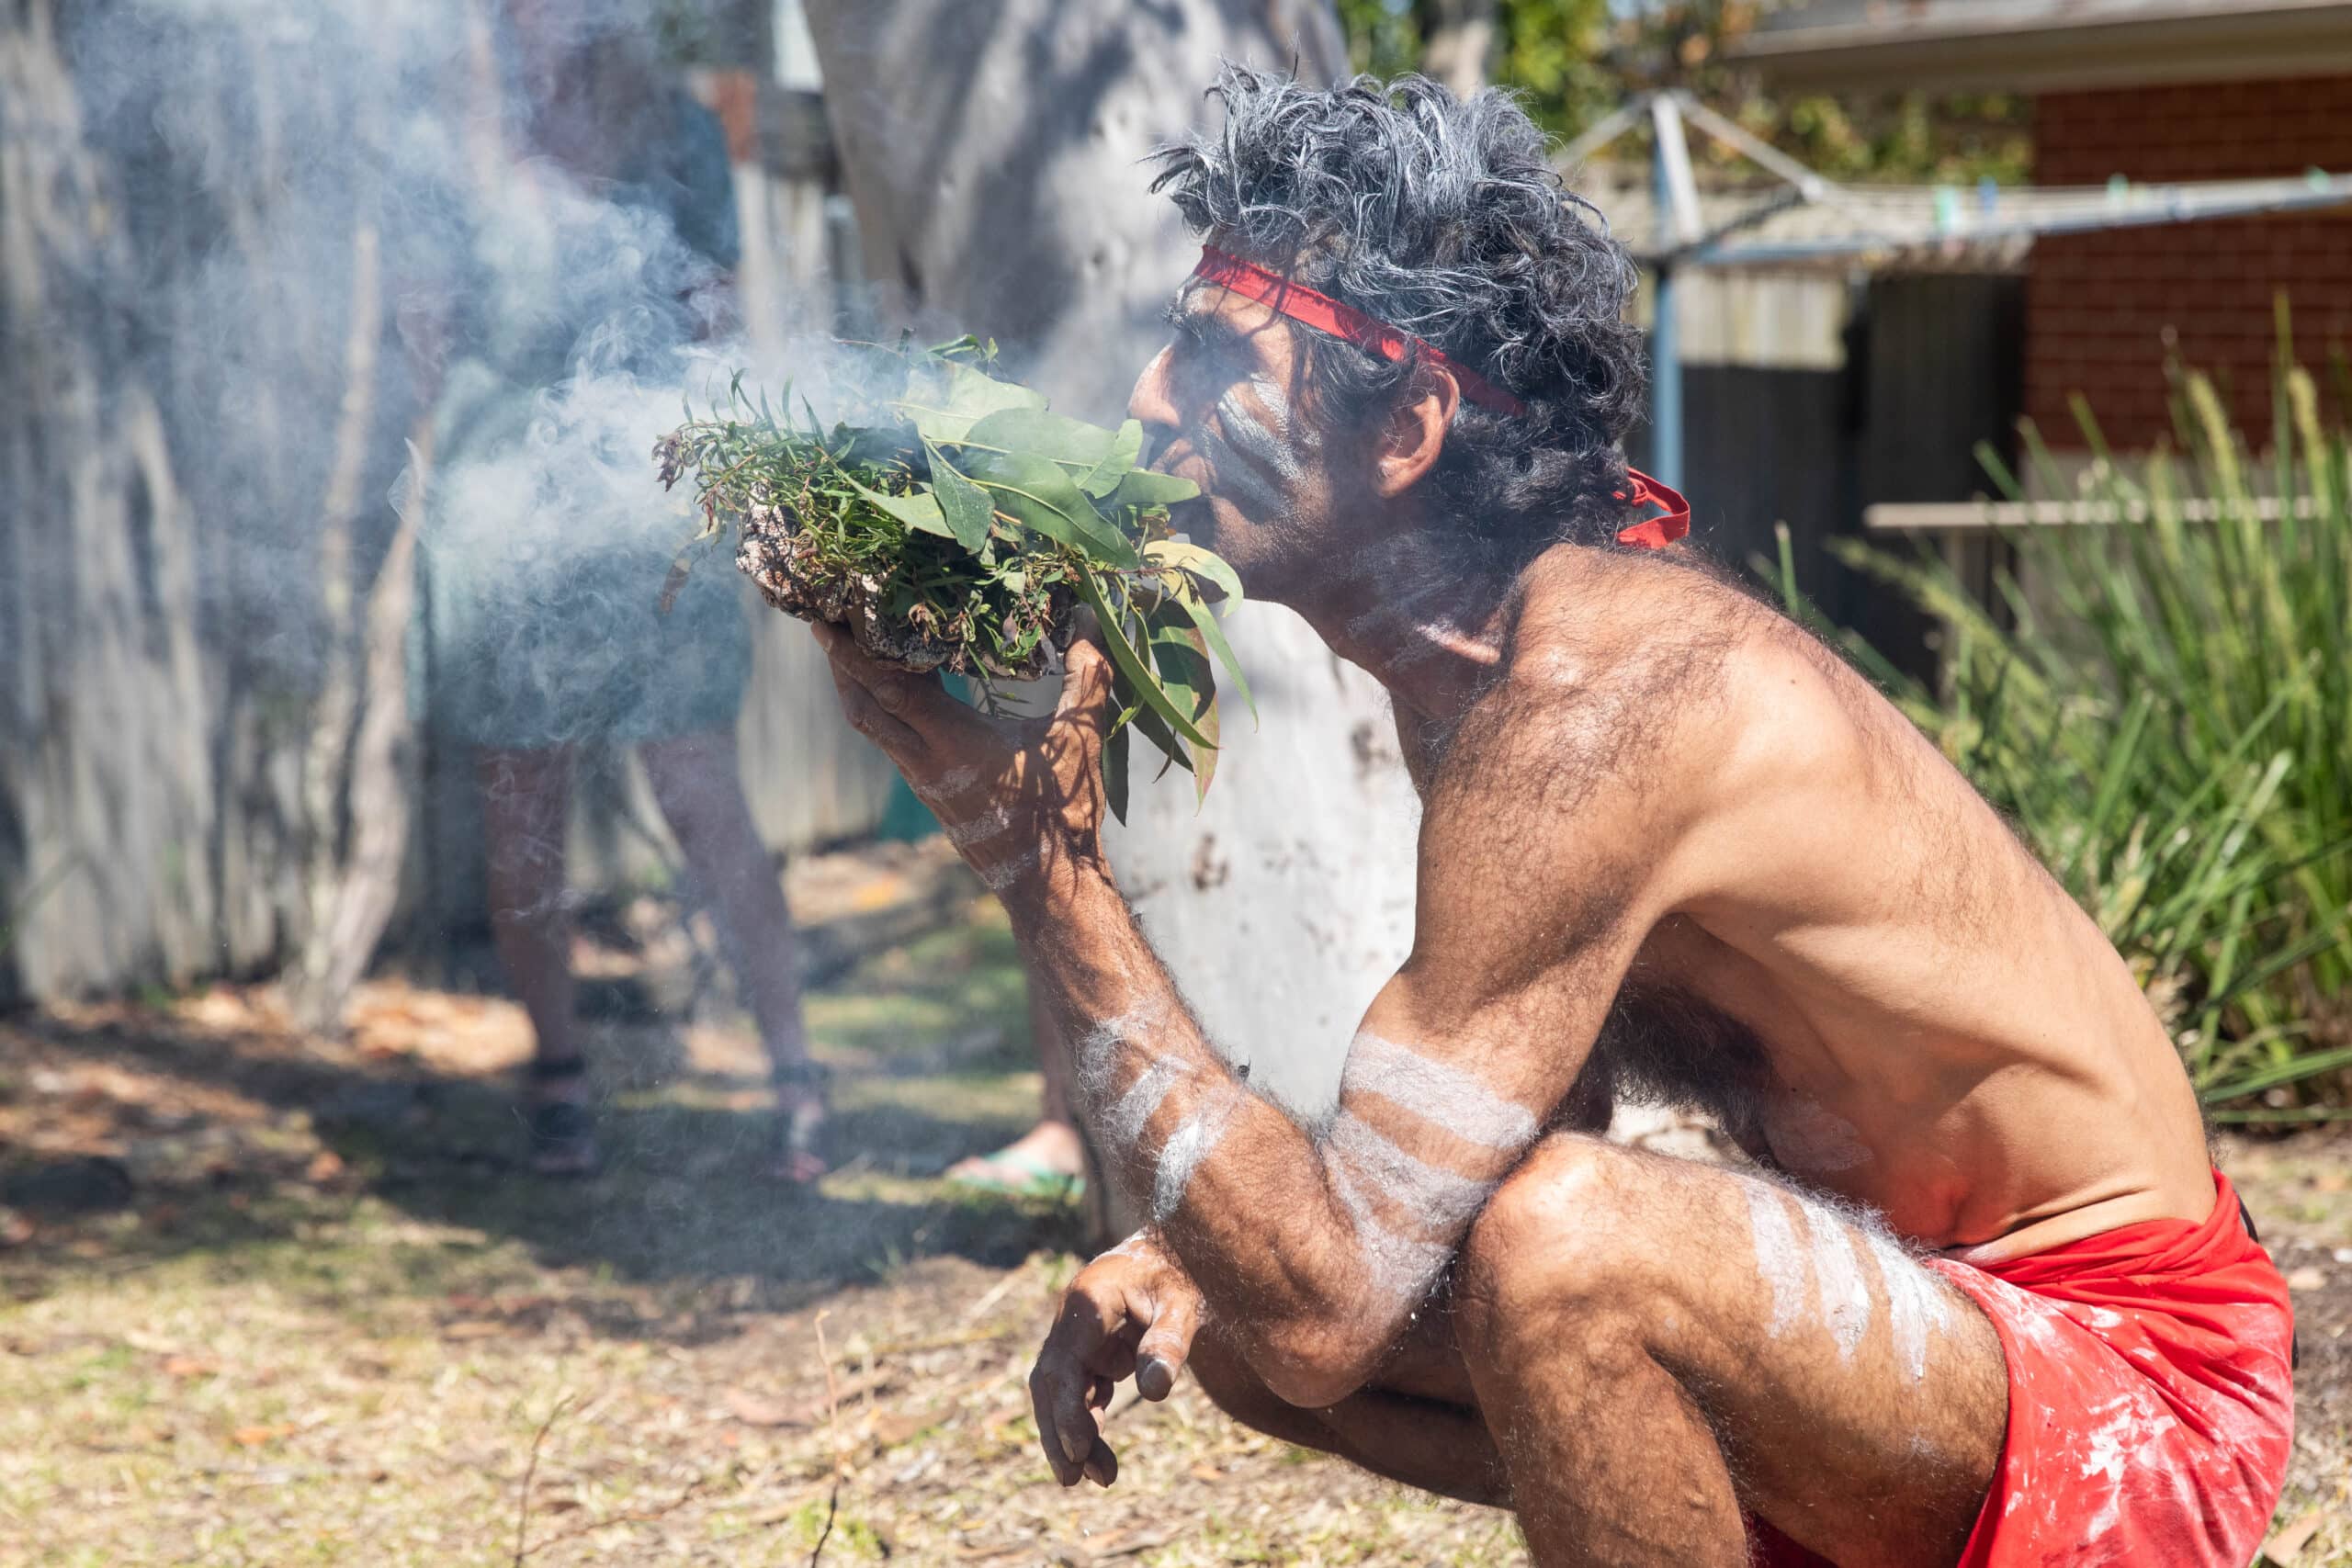 An Aboriginal man performing a smoking ceremony in traditional dress and body paint